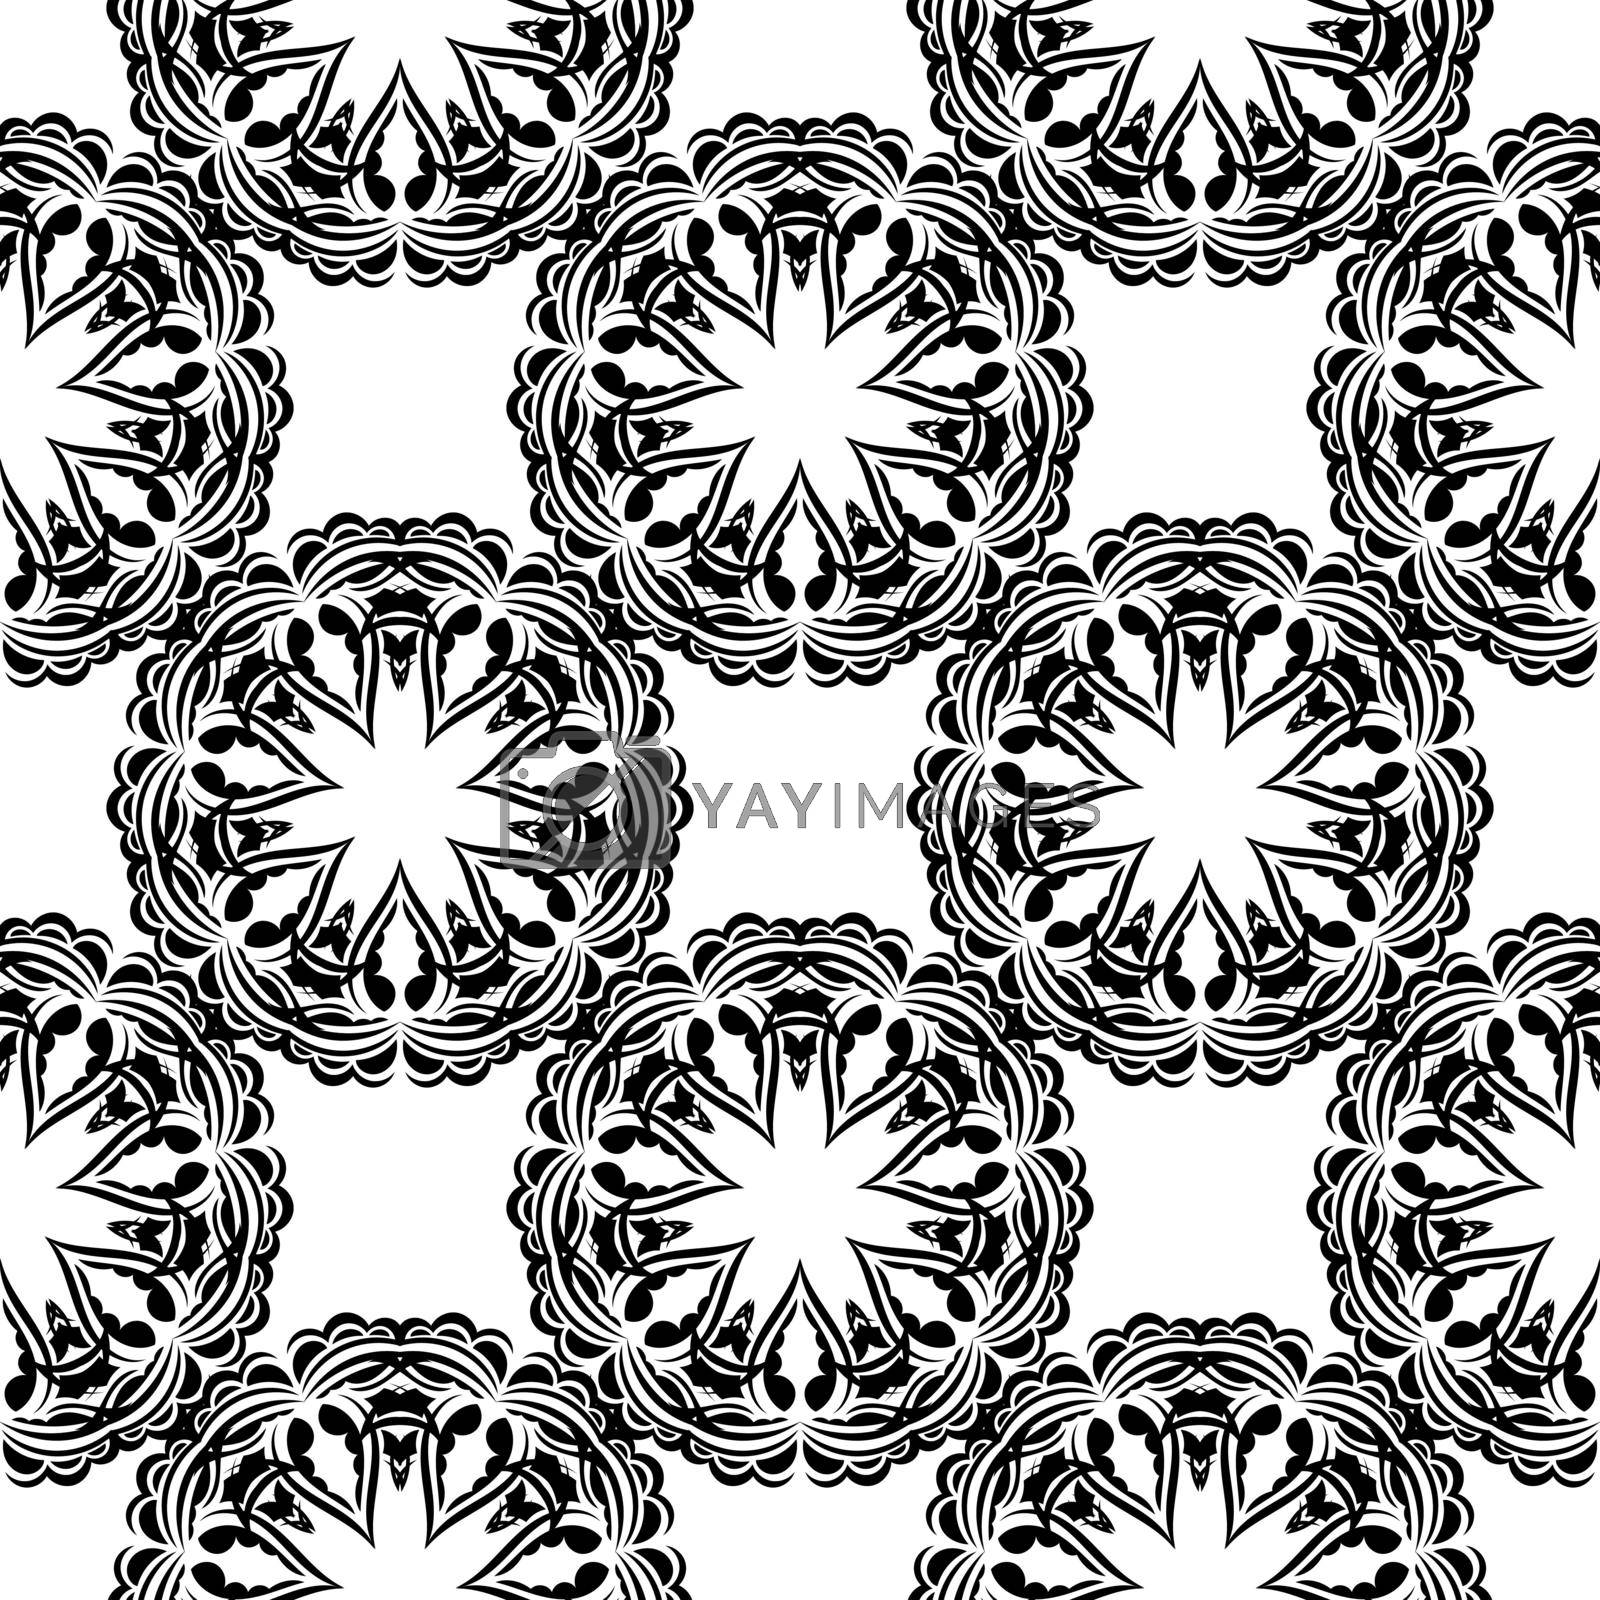 Black and white seamless pattern with luxury, vintage, decorative ornaments. Good for clothing, textiles, backgrounds and prints. Vector illustration.